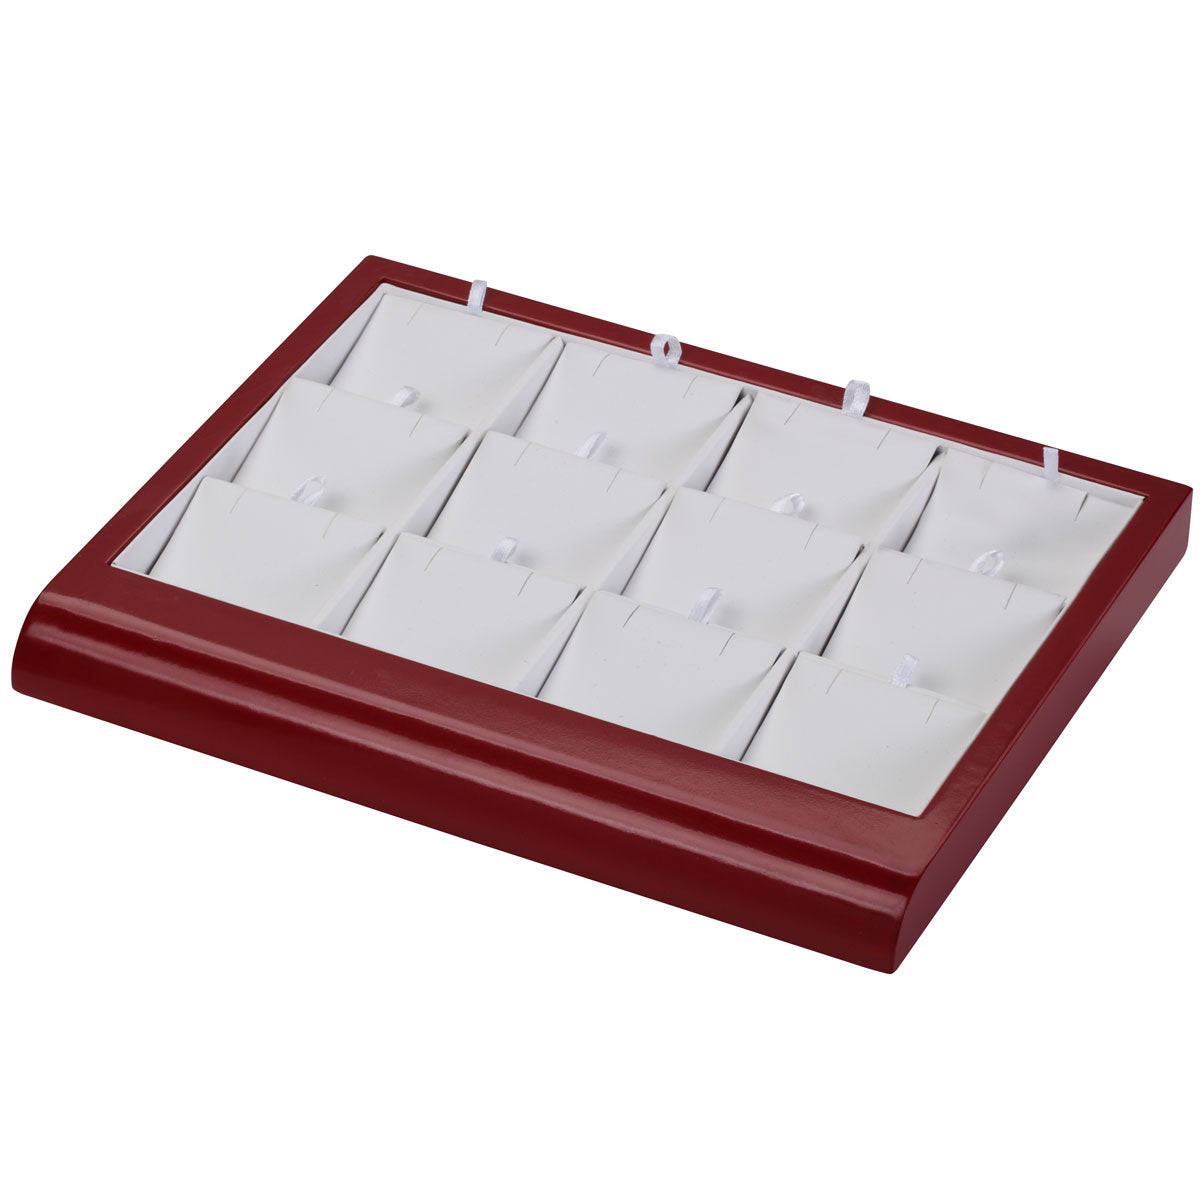 12-Pair Earring or Pendant Display Trays w/Curved Front in Pearl & Mahogany, 9.38" L x 7.38" W